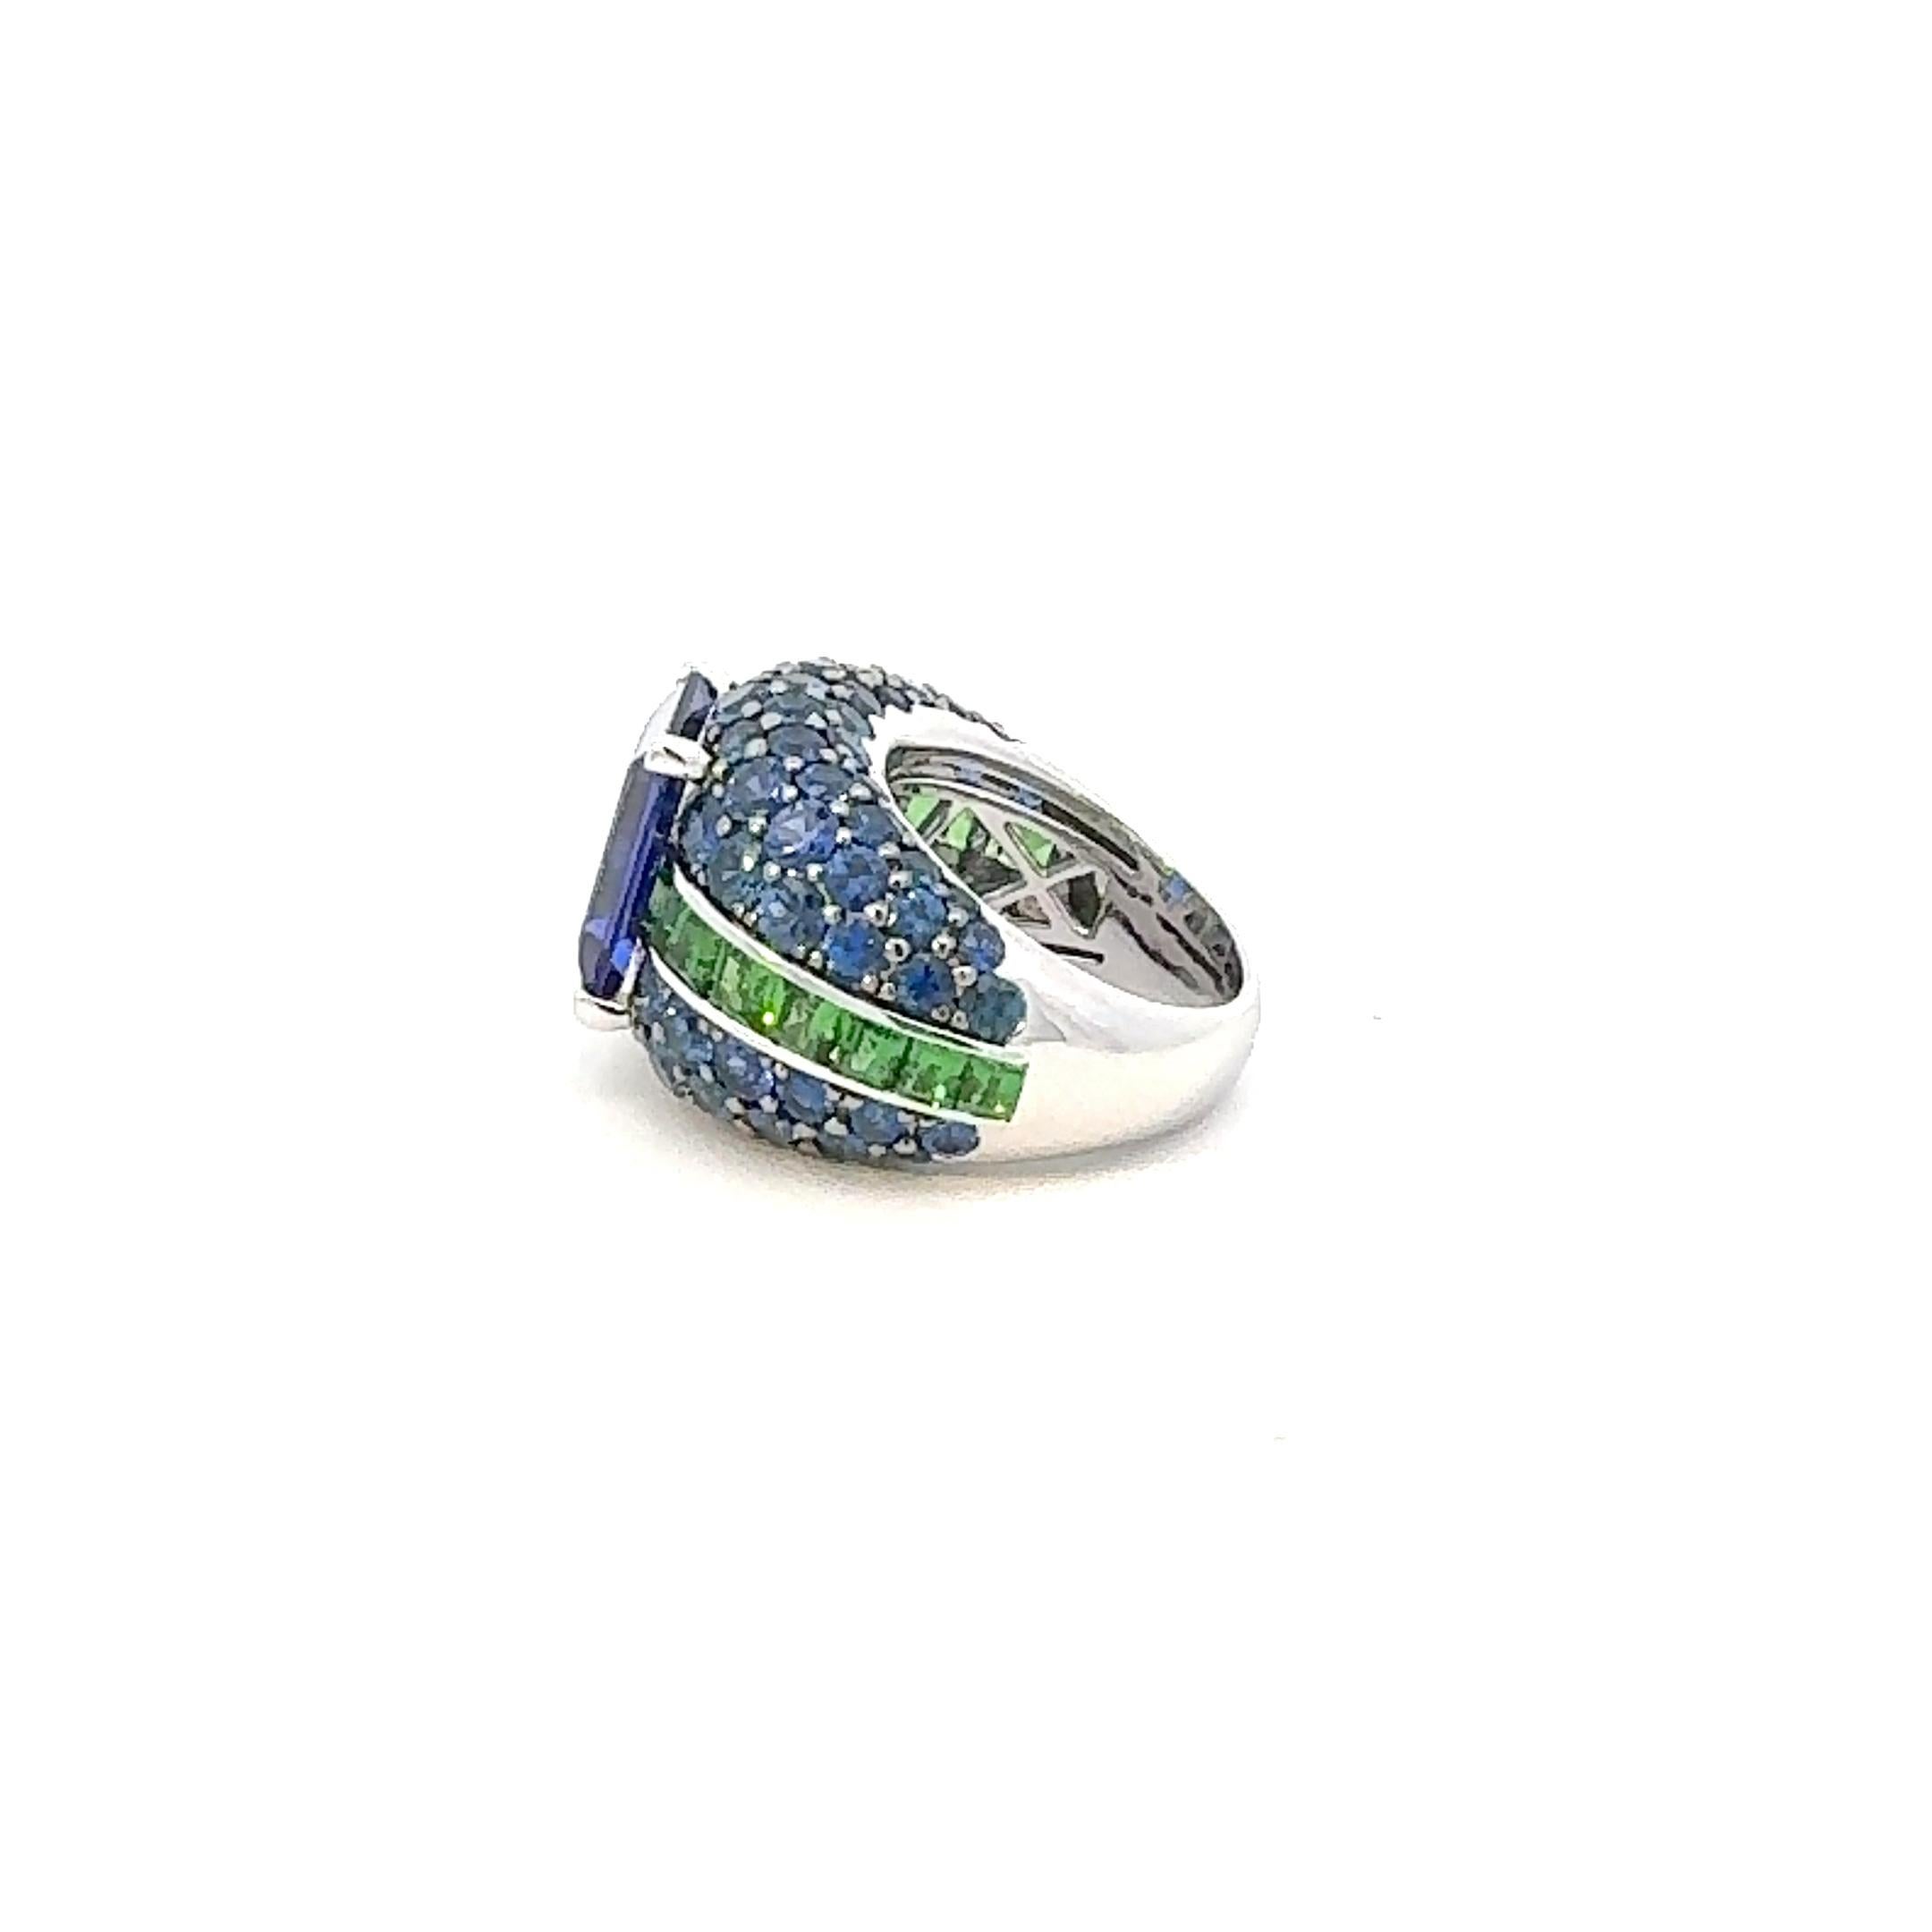 Ring

18K White Gold

Sapphire 8.46 ct
Tanzanite 7.03 ct
Tsavorite 2.30 ct

Weight 17 grams


It is our honour to create fine jewelry, and it’s for that reason that we choose to only work with high-quality, enduring materials that can almost